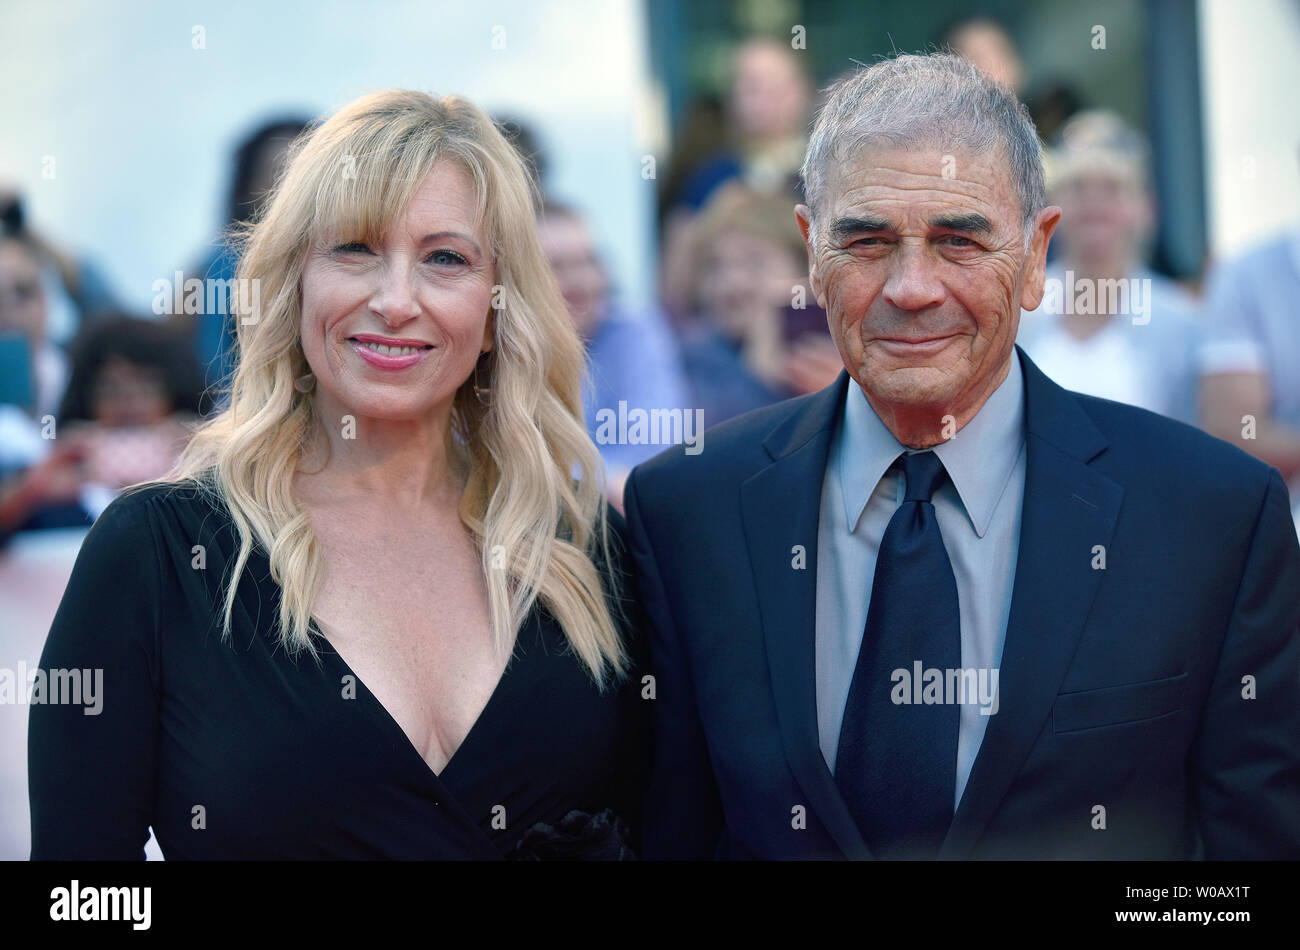 Robert Forster (R) and Evie Forster arrive for the premiere of 'What They Had' at Roy Thomson Hall during the Toronto International Film Festival in Toronto, Canada on September 12, 2018. Photo by Christine Chew/UPI Stock Photo